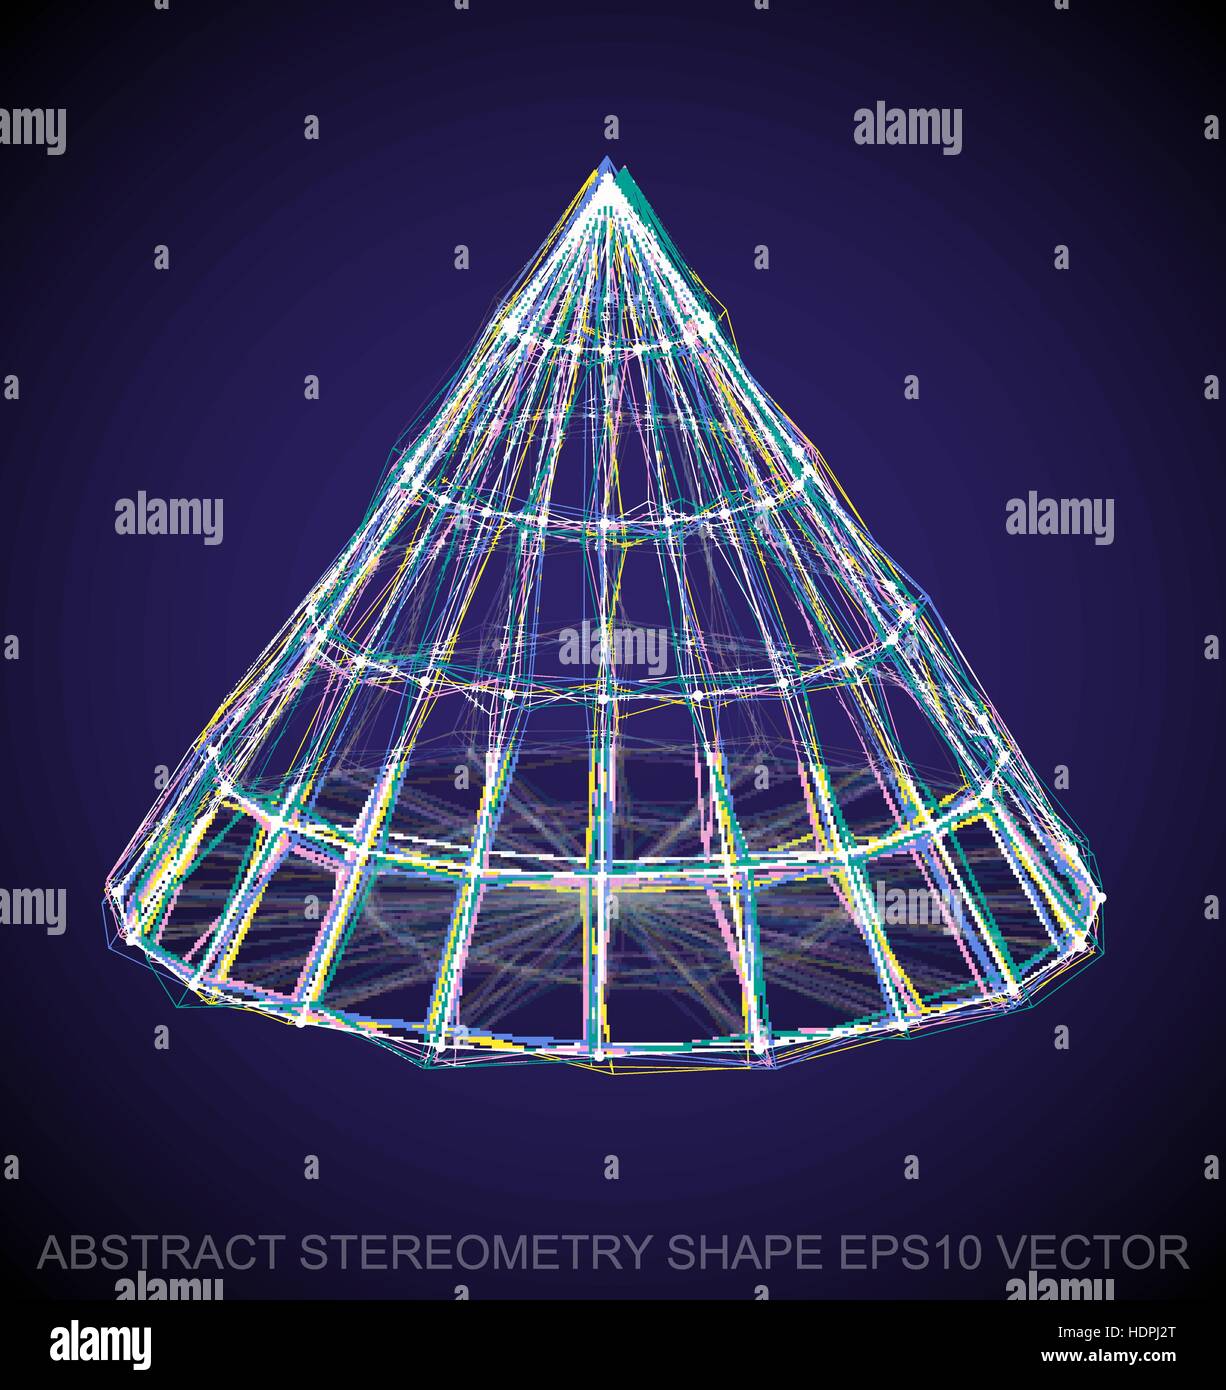 Abstract stereometry shape: Multicolor sketched Cone with Transparent ...